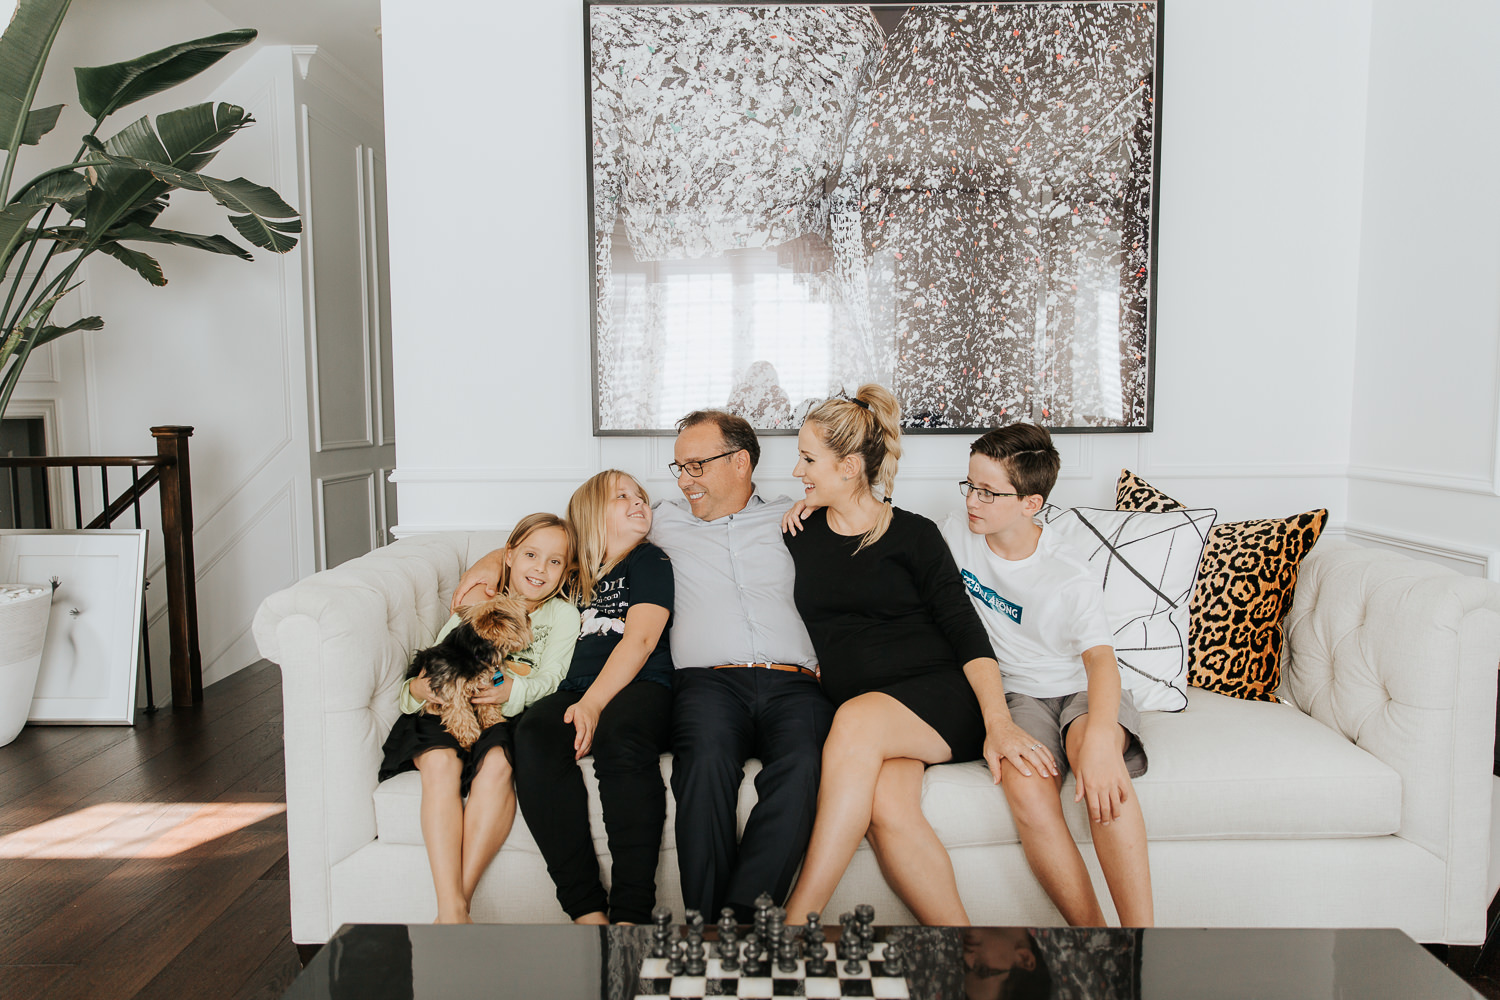 family of 5 sitting on couch together, smiling at one another, 2 daughters 1 son, 8 year old girl holding yorkie dog in lap - York Region In-Home Photography